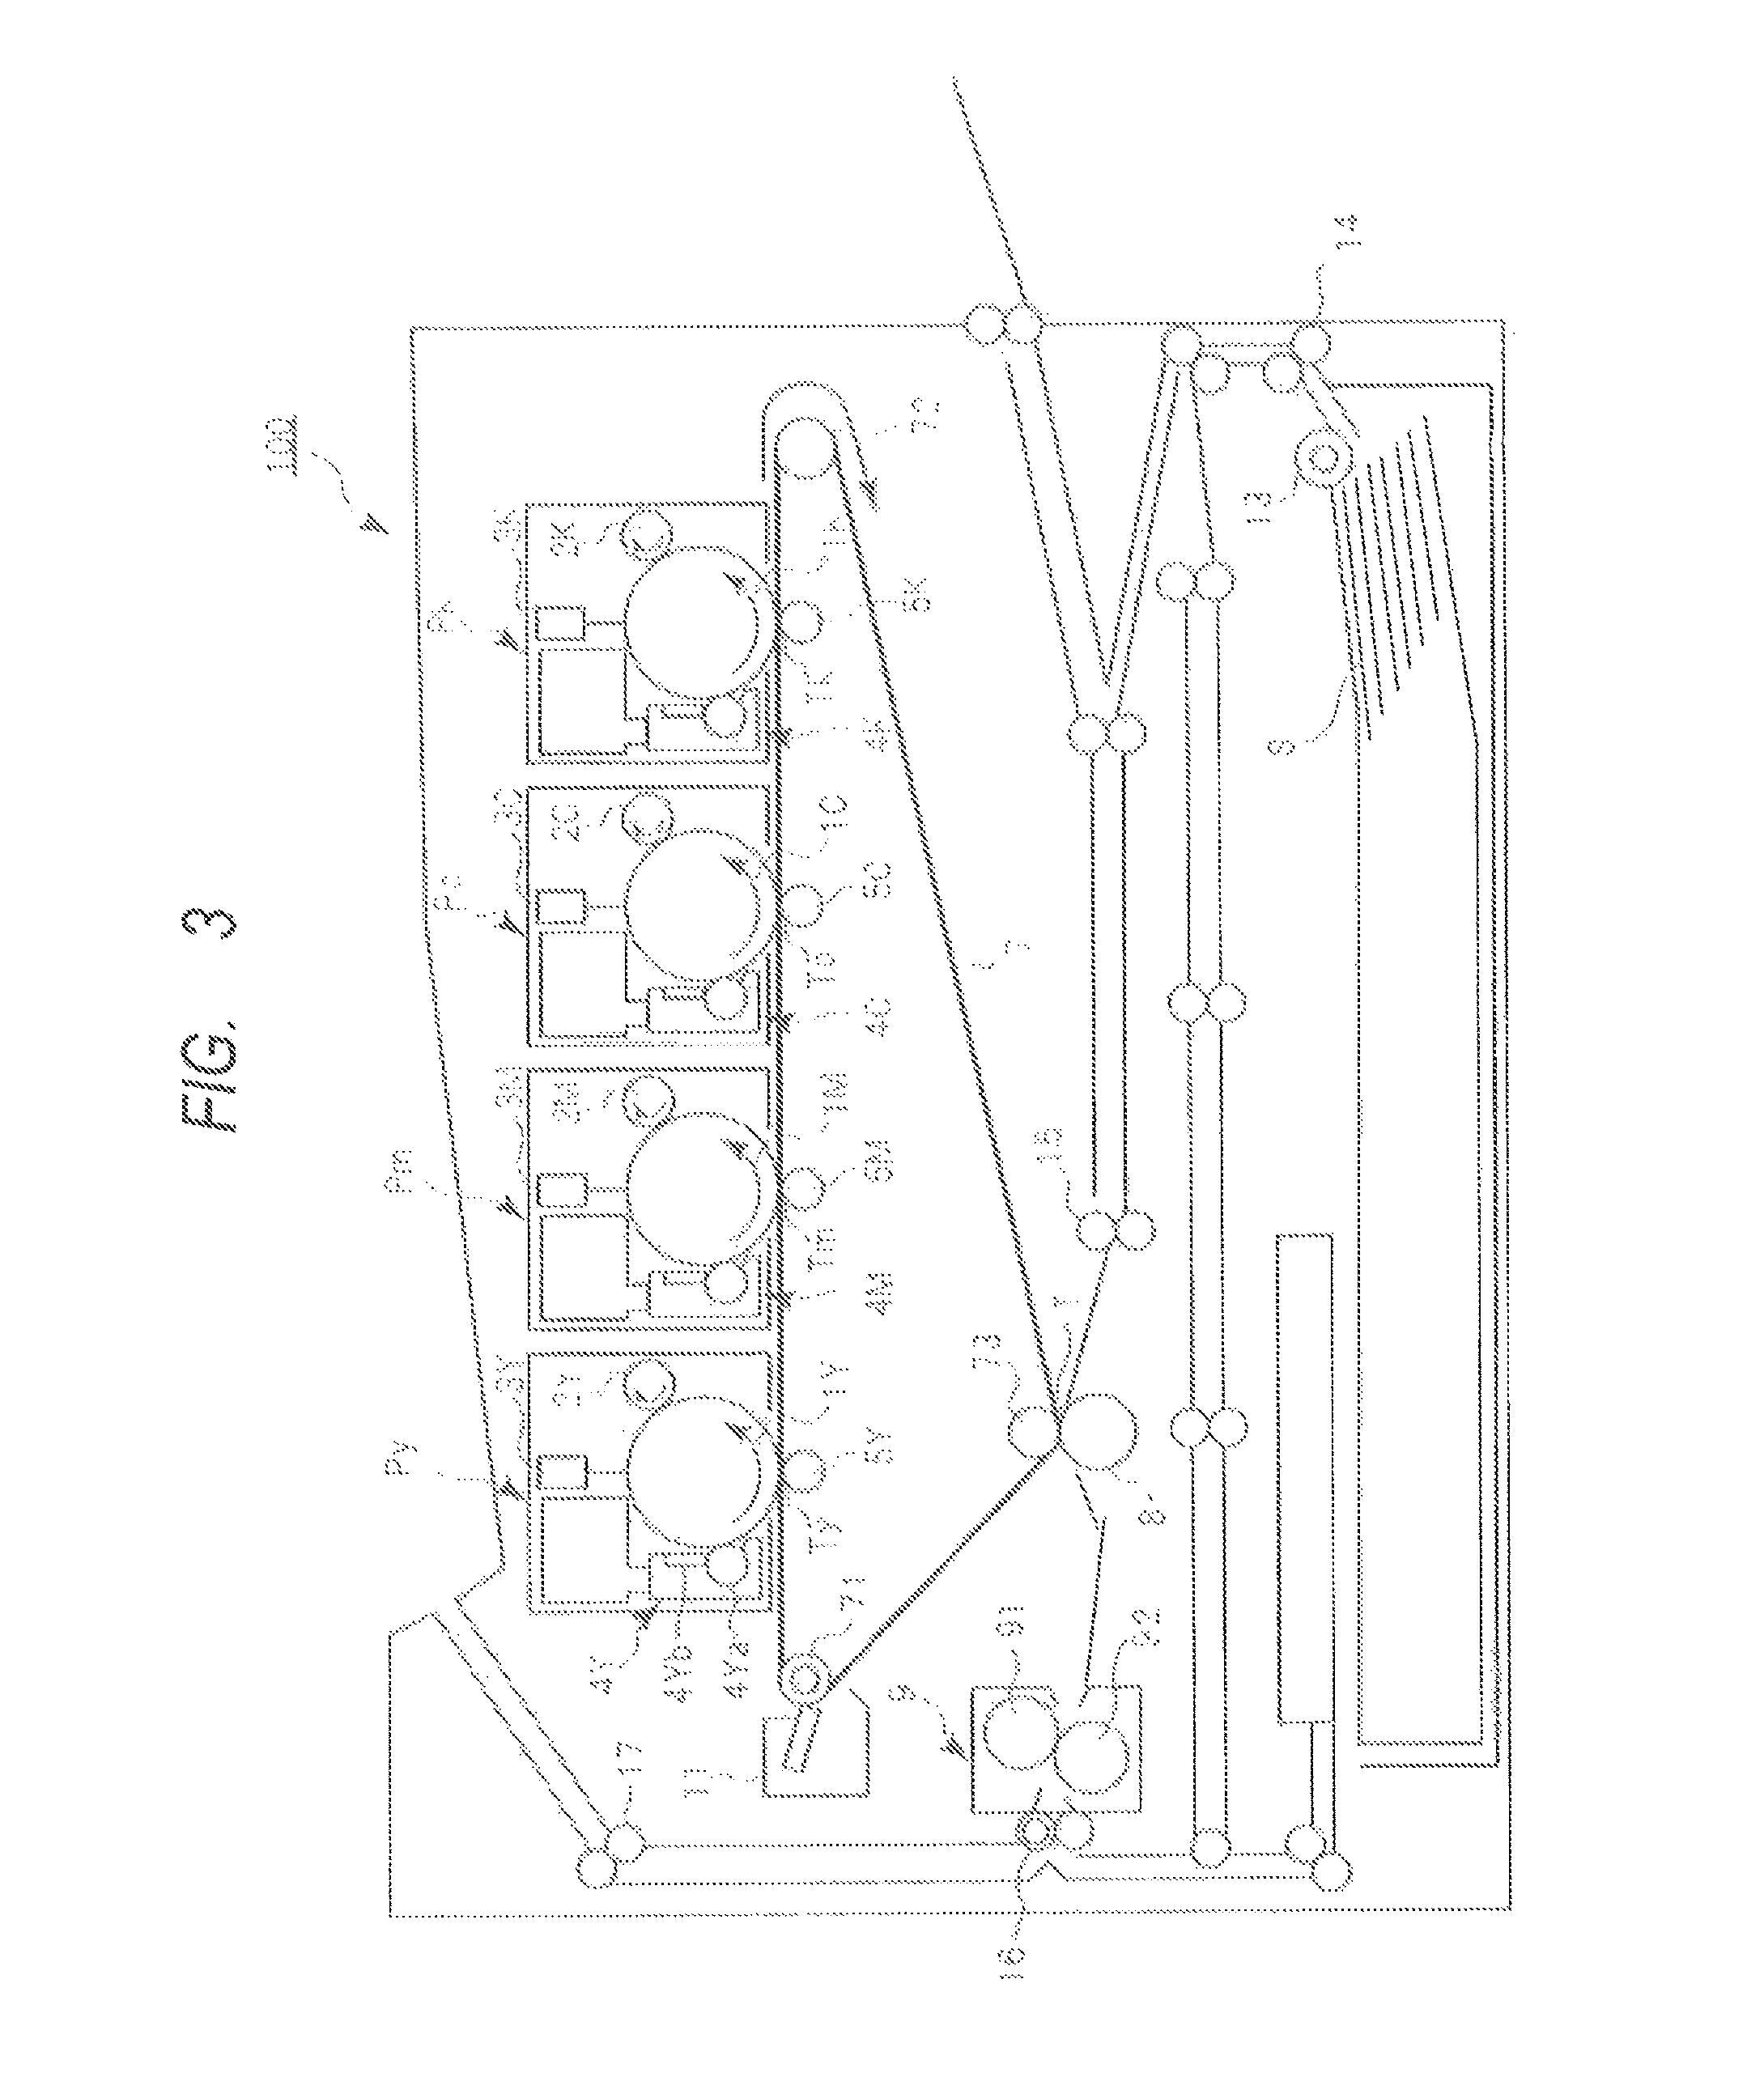 Transfer member for electrophotography and electrophotographic image forming apparatus